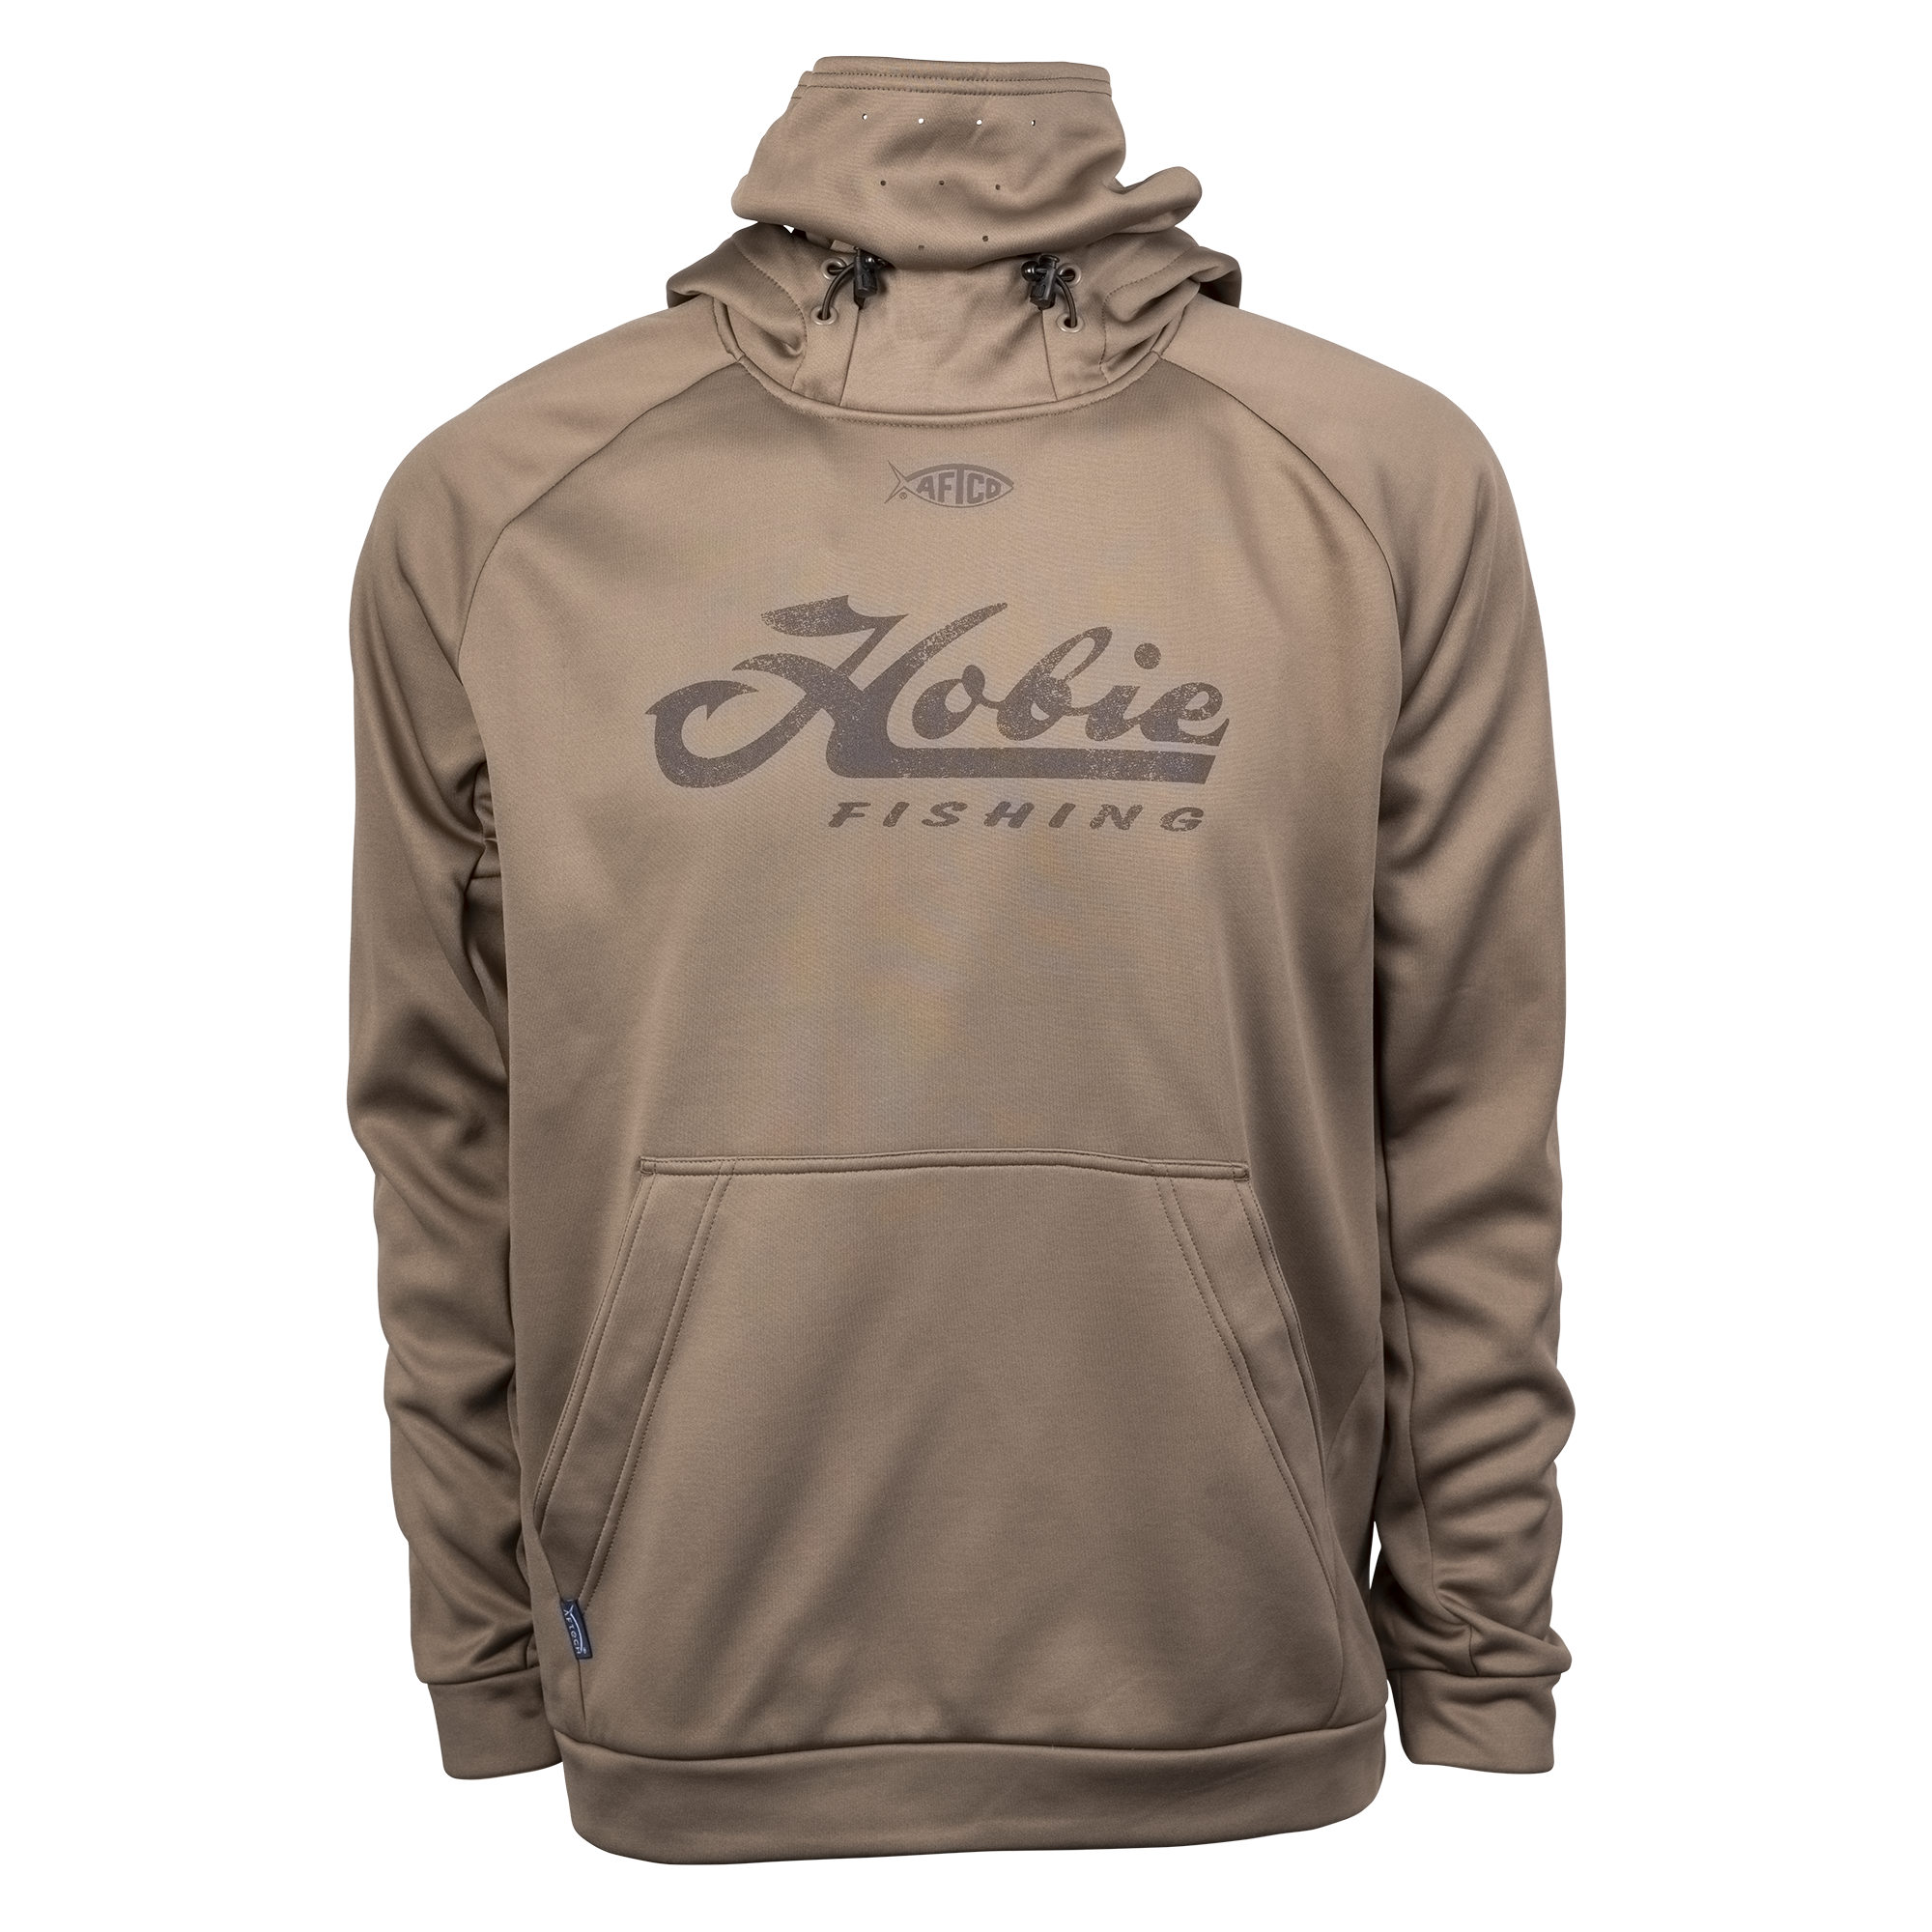 Fishing Technical Hoodie By Aftco - Mariner Sails